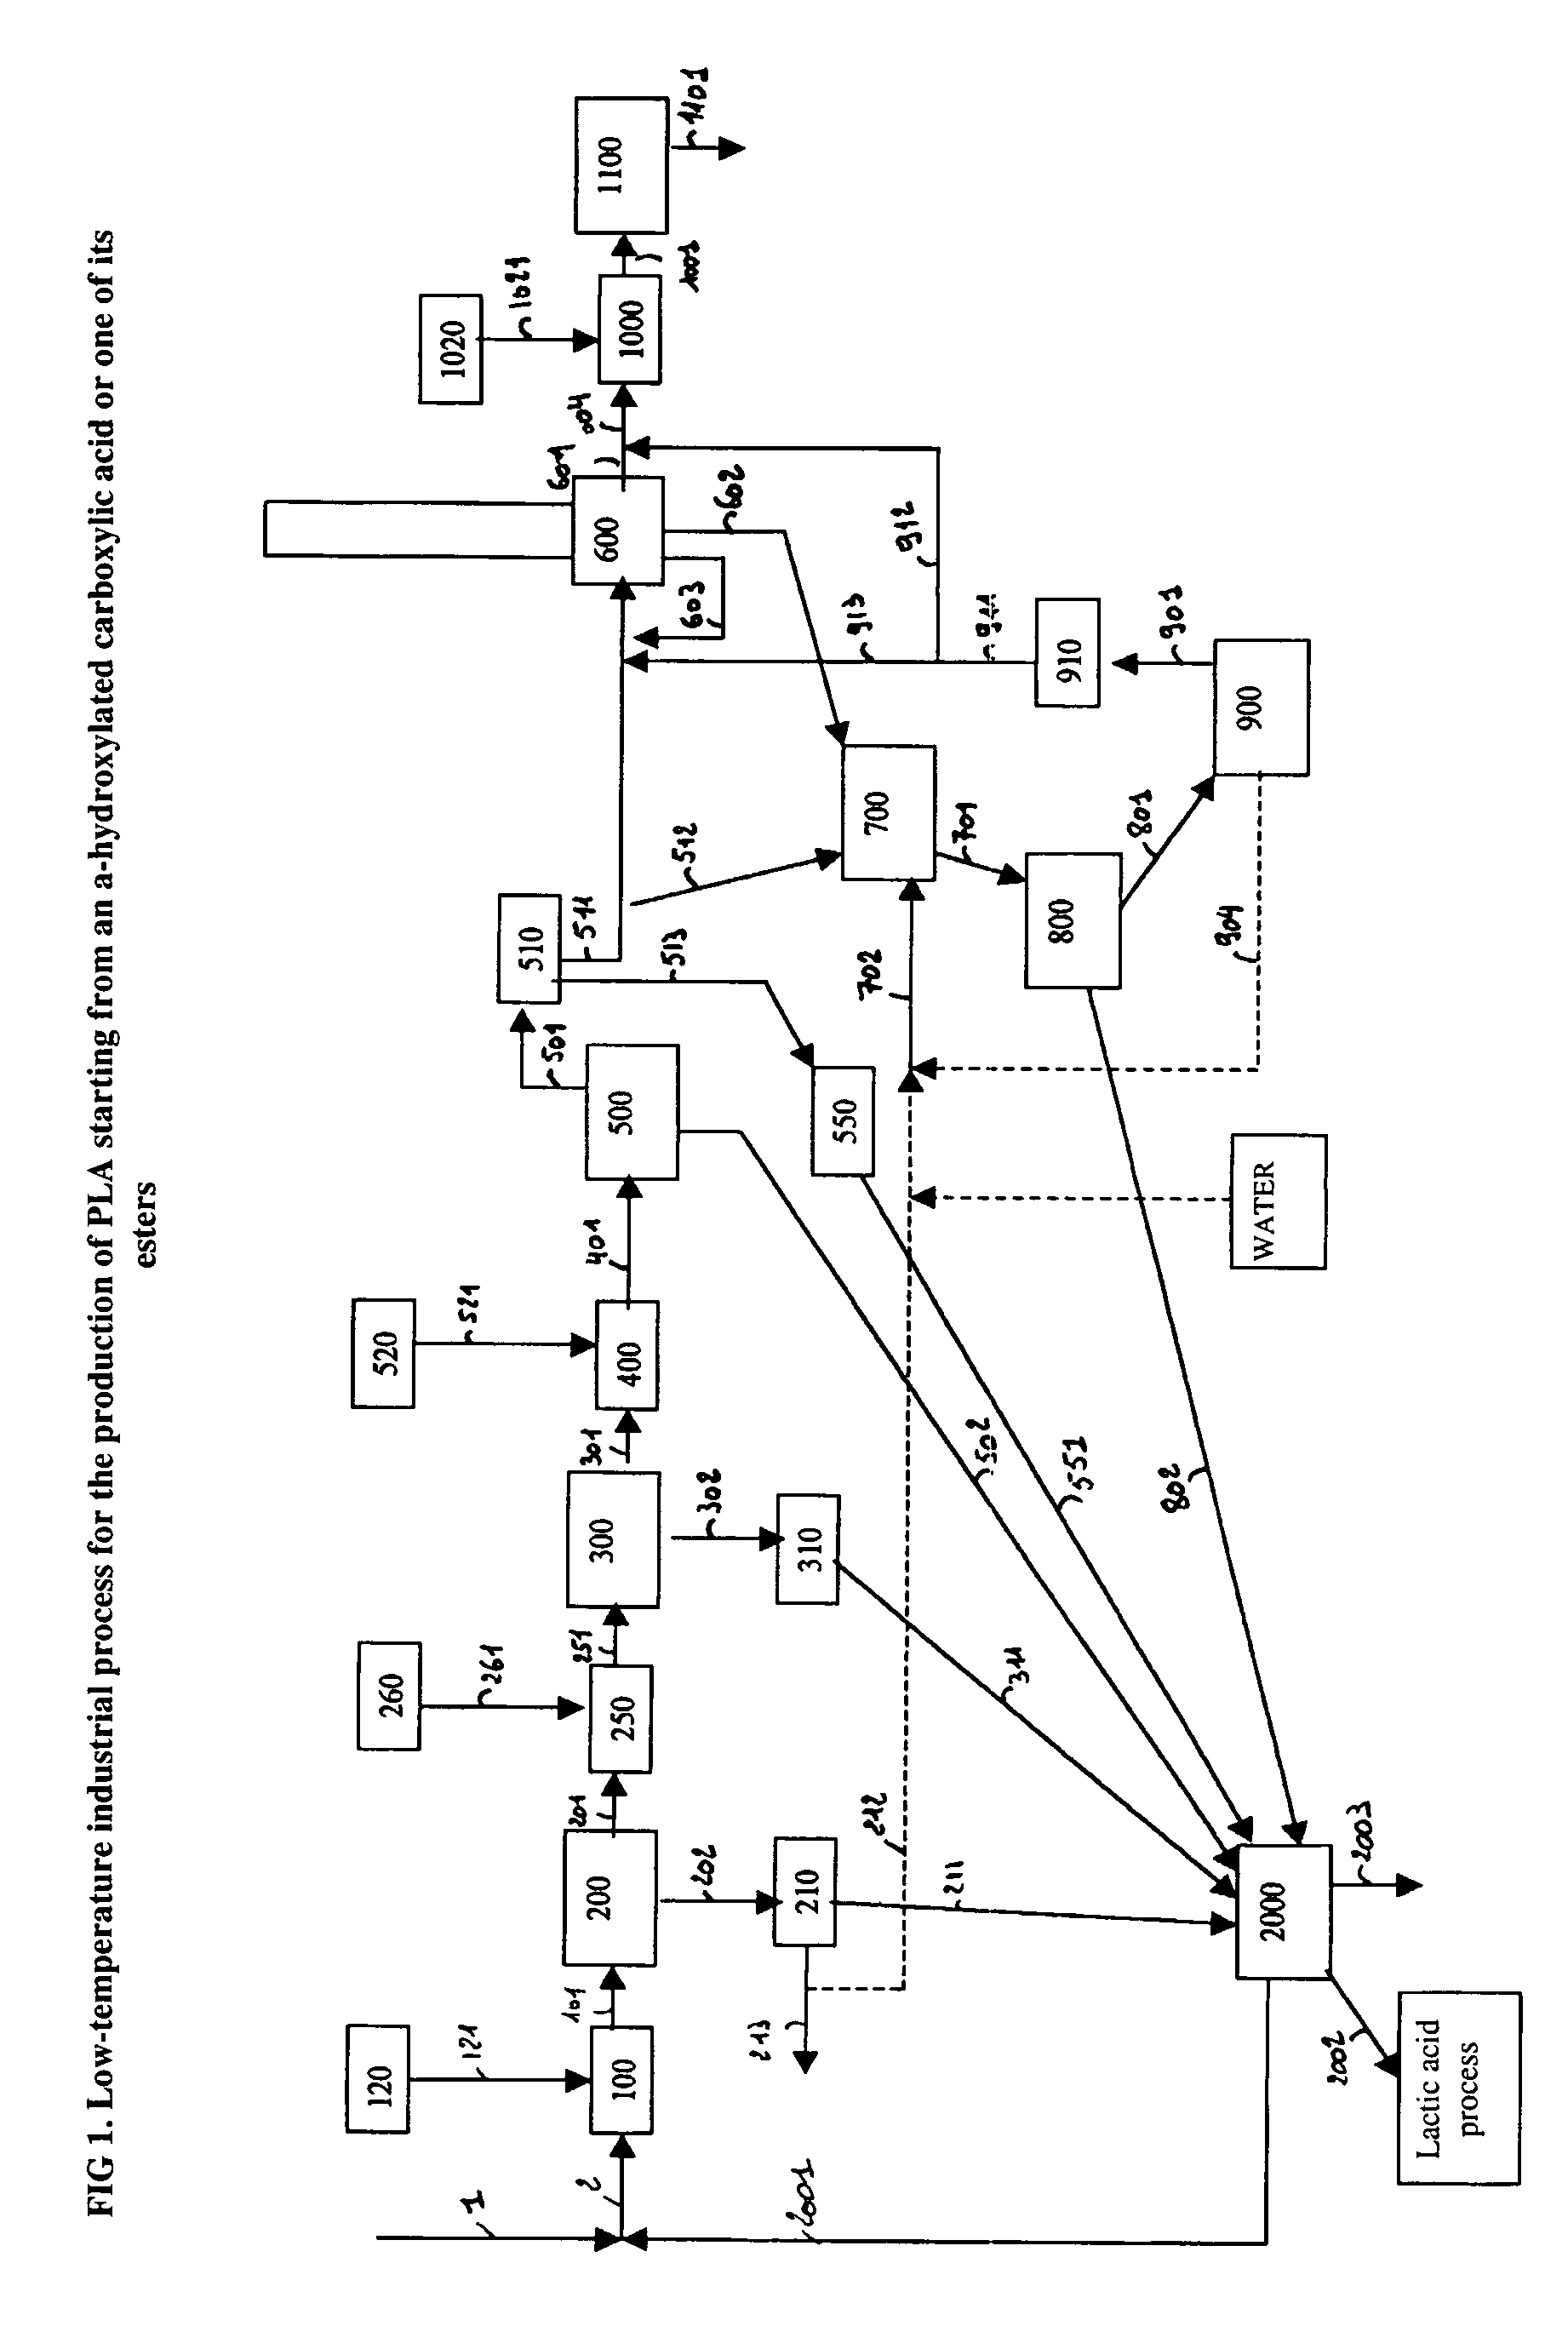 Method for the production of polyactide from a solution of lactic acid or one of the derivatives thereof